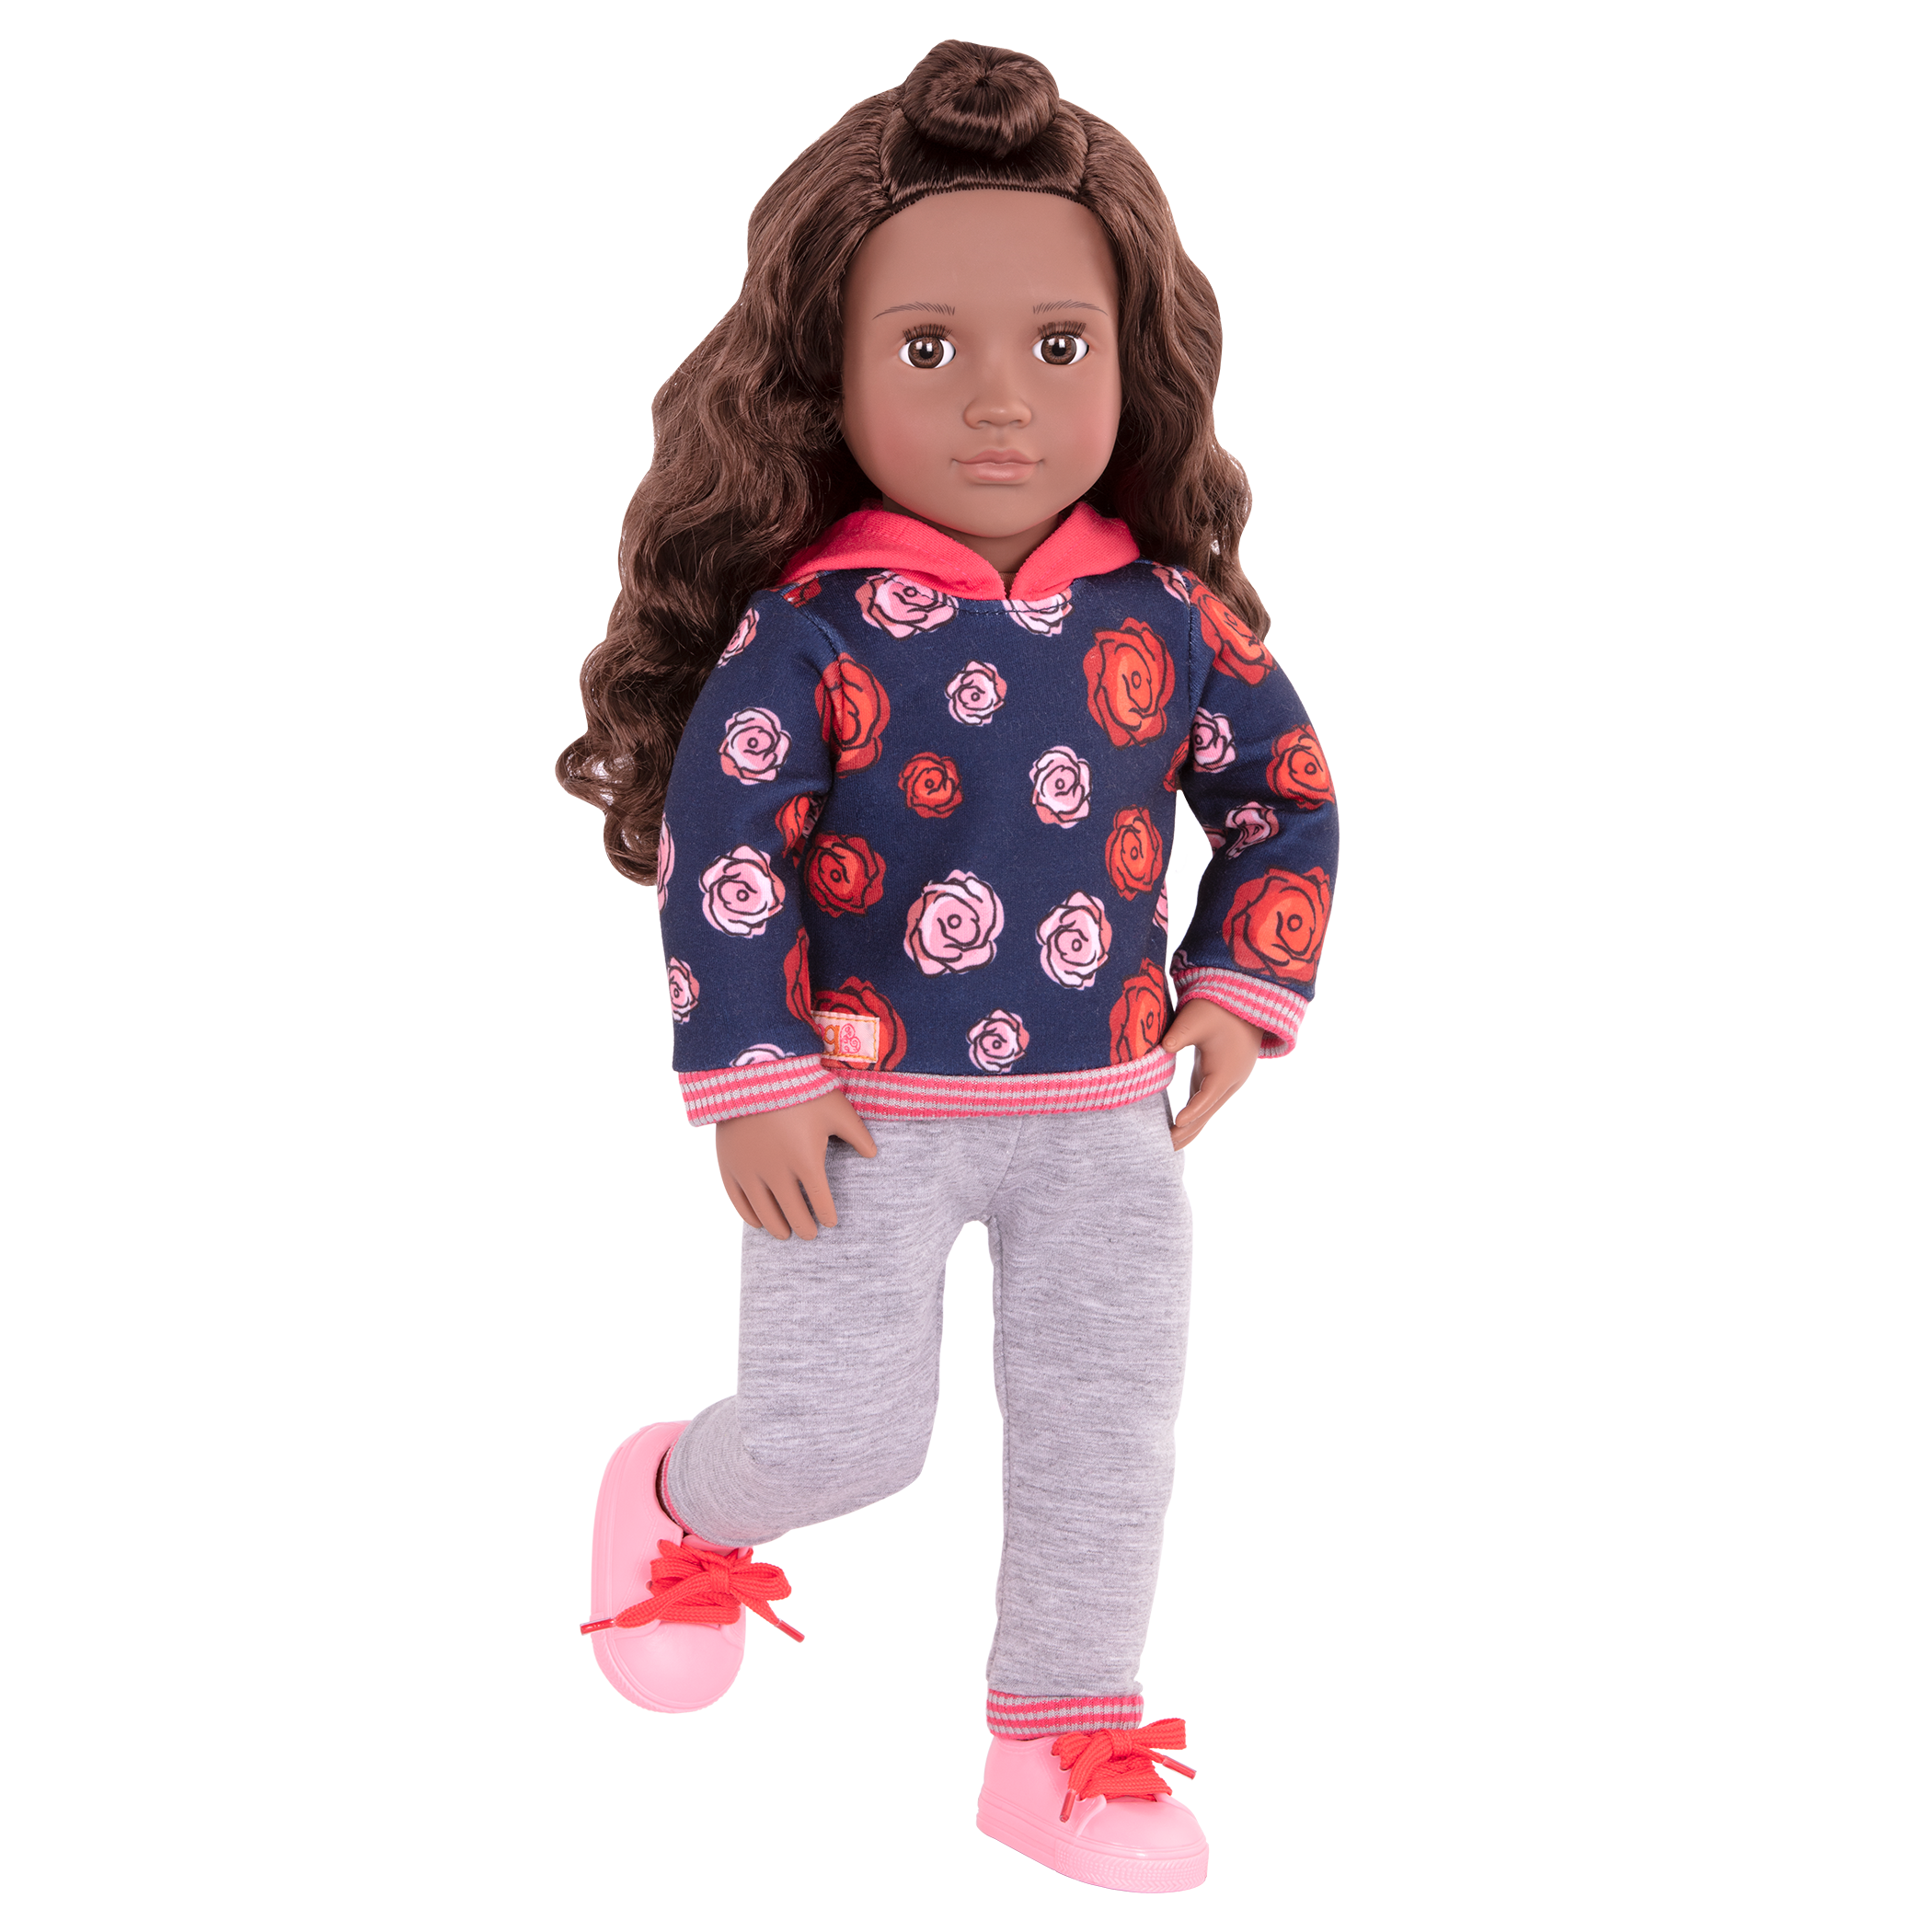 18-inch doll with brown hair, brown eyes, hospital accessories and storybook